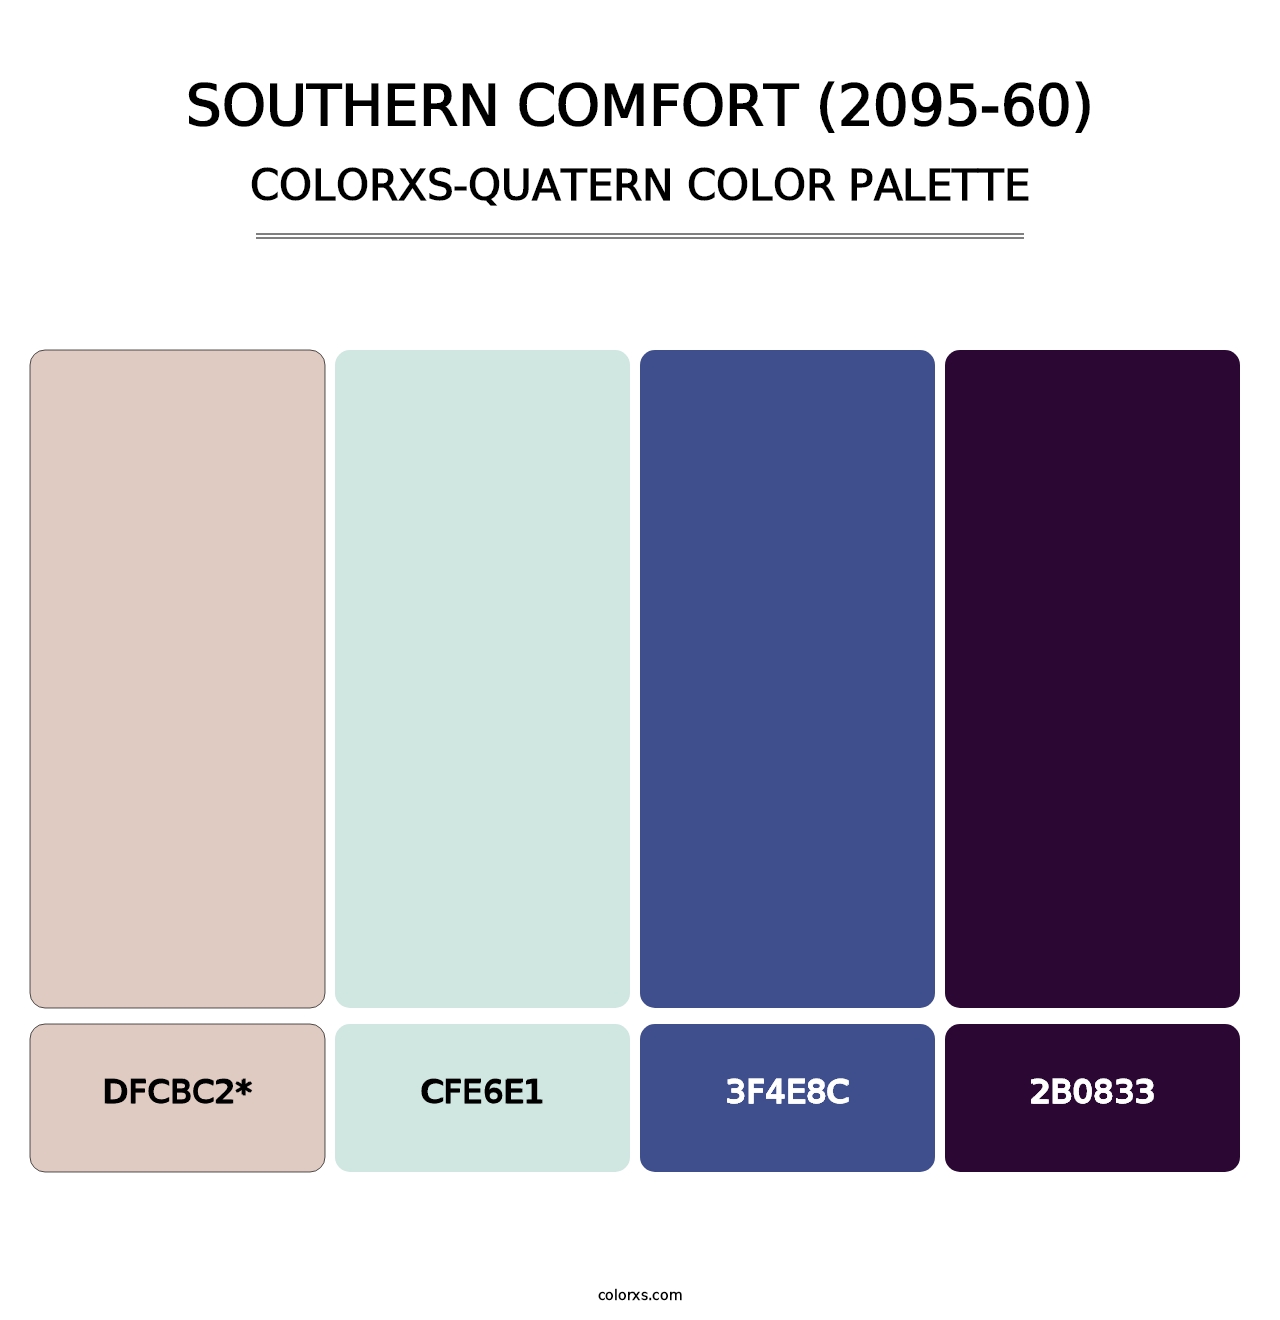 Southern Comfort (2095-60) - Colorxs Quatern Palette